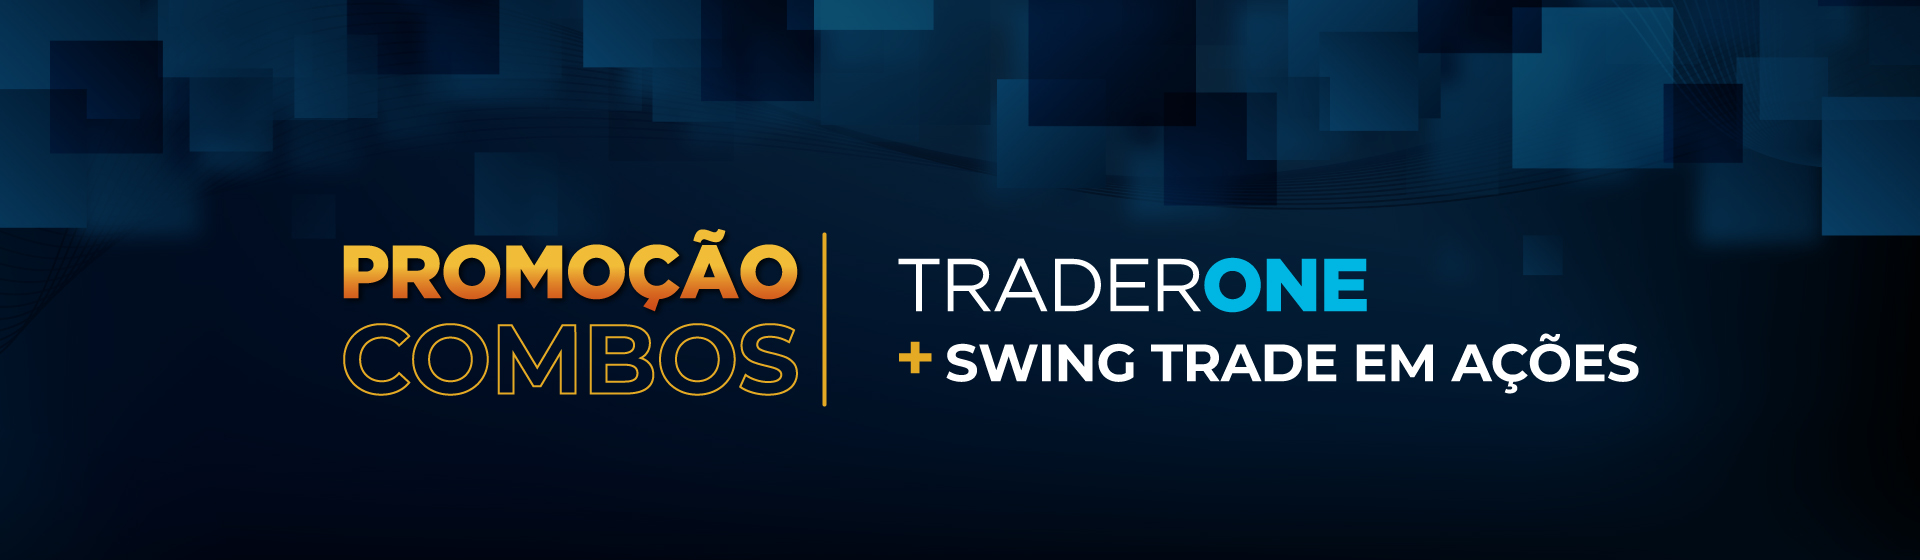 3 banner trader%2bswing